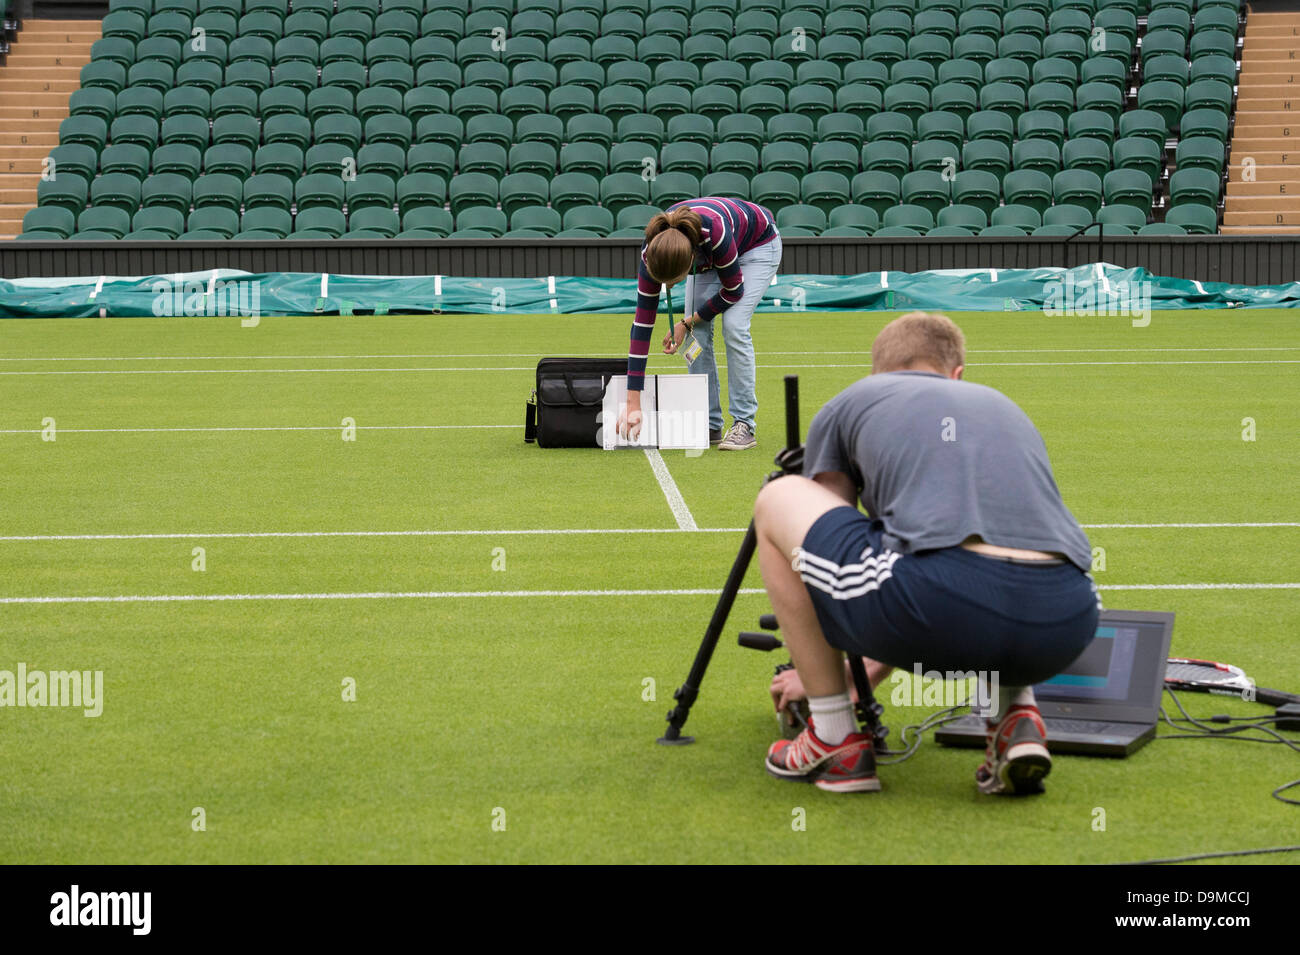 London, UK. 22nd June 2013. Practice and preparations take place ahead of The Wimbledon Tennis Championships 2013 held at The All England Lawn Tennis and Croquet Club.  General View (GV).  Hawkeye technicians make final adjustments to their system on Centre Court Credit:  Duncan Grove/Alamy Live News Stock Photo